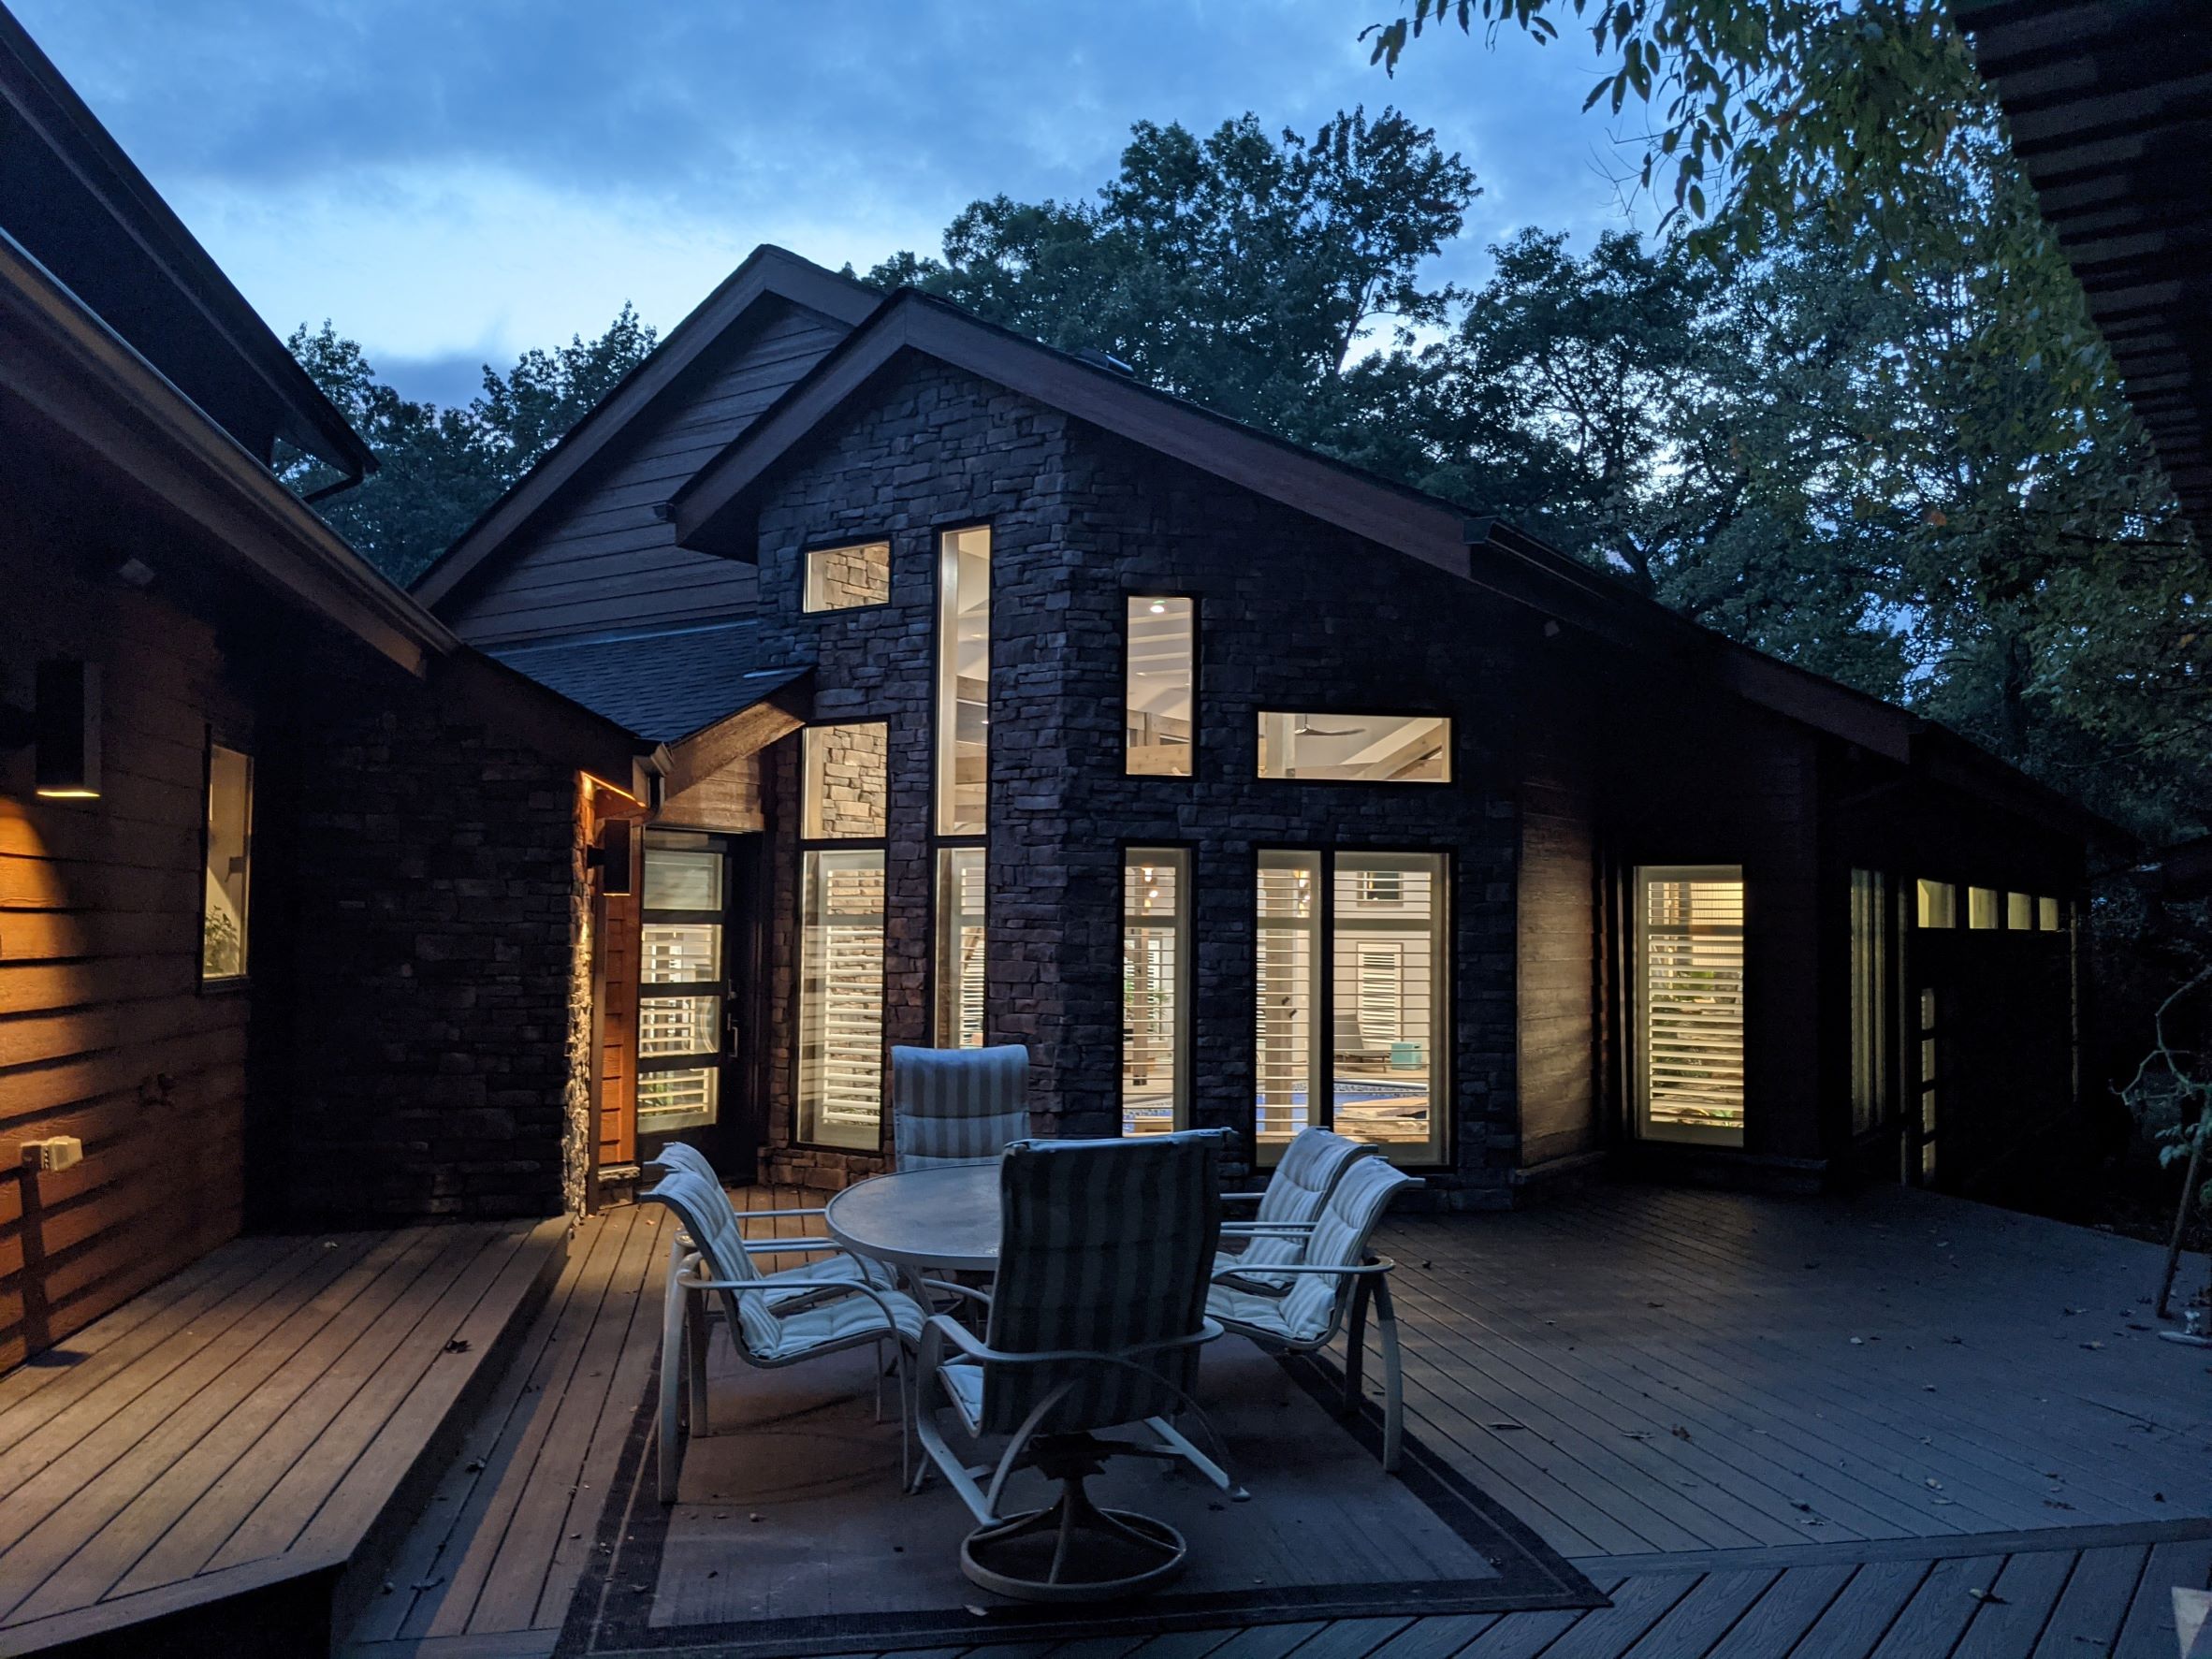 Stunning dusk view of deck area in foreground with Contemporary House addition with stone, wood siding and modern geometric window design with light spilling out of windows outside of Pittsburgh Pennsylvania